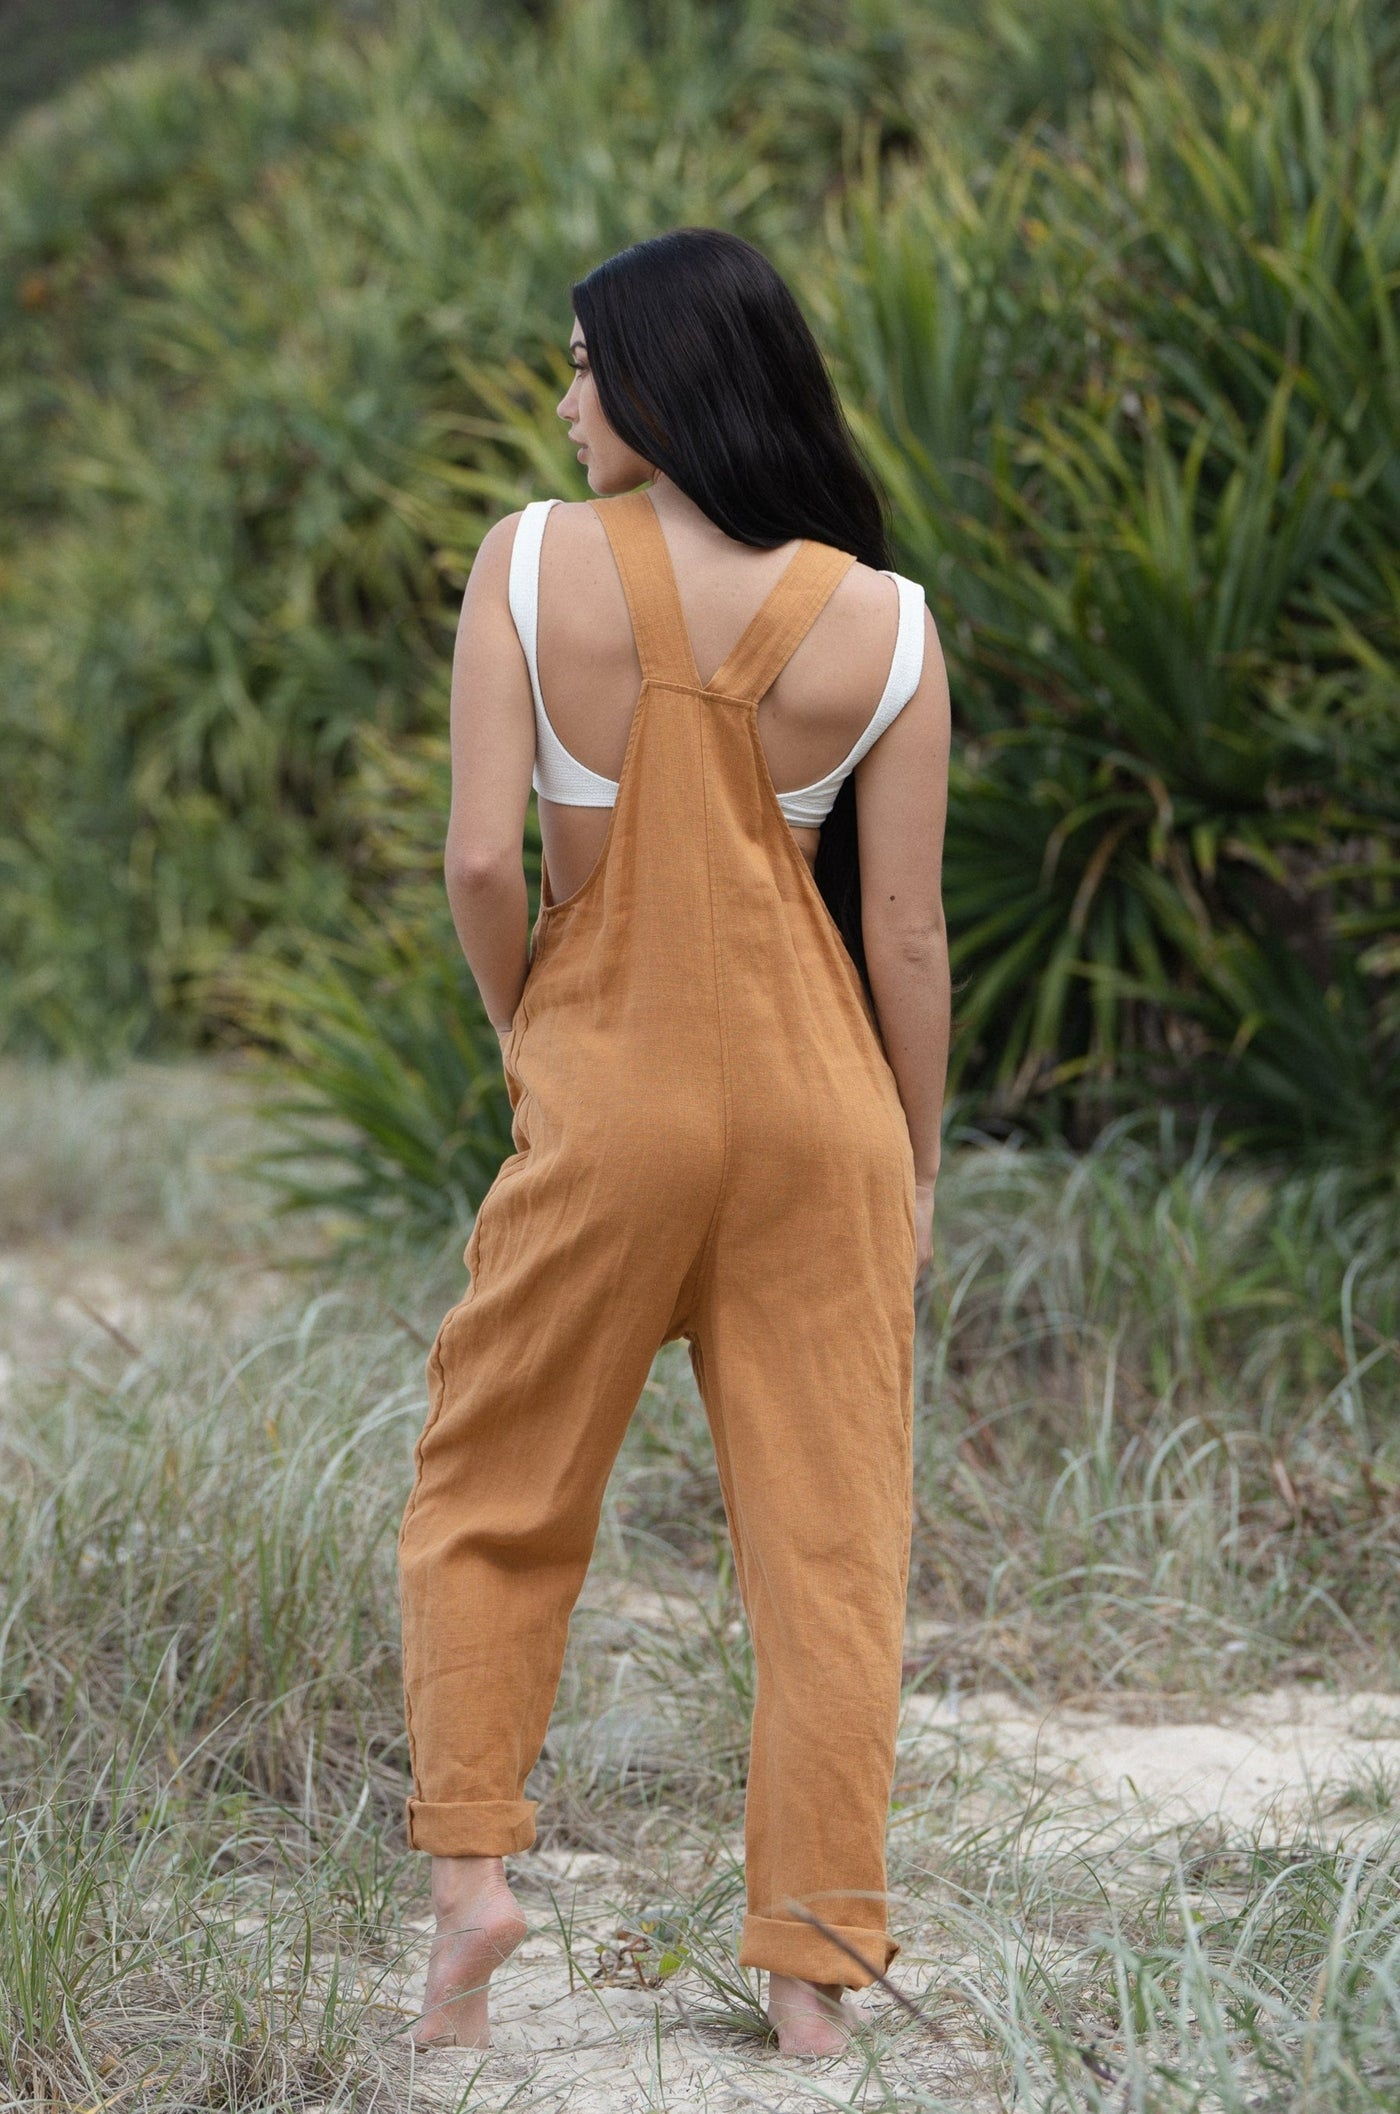 Lilly Pilly Collection 100% organic linen Piper Linen Jumpsuit in Nutmeg